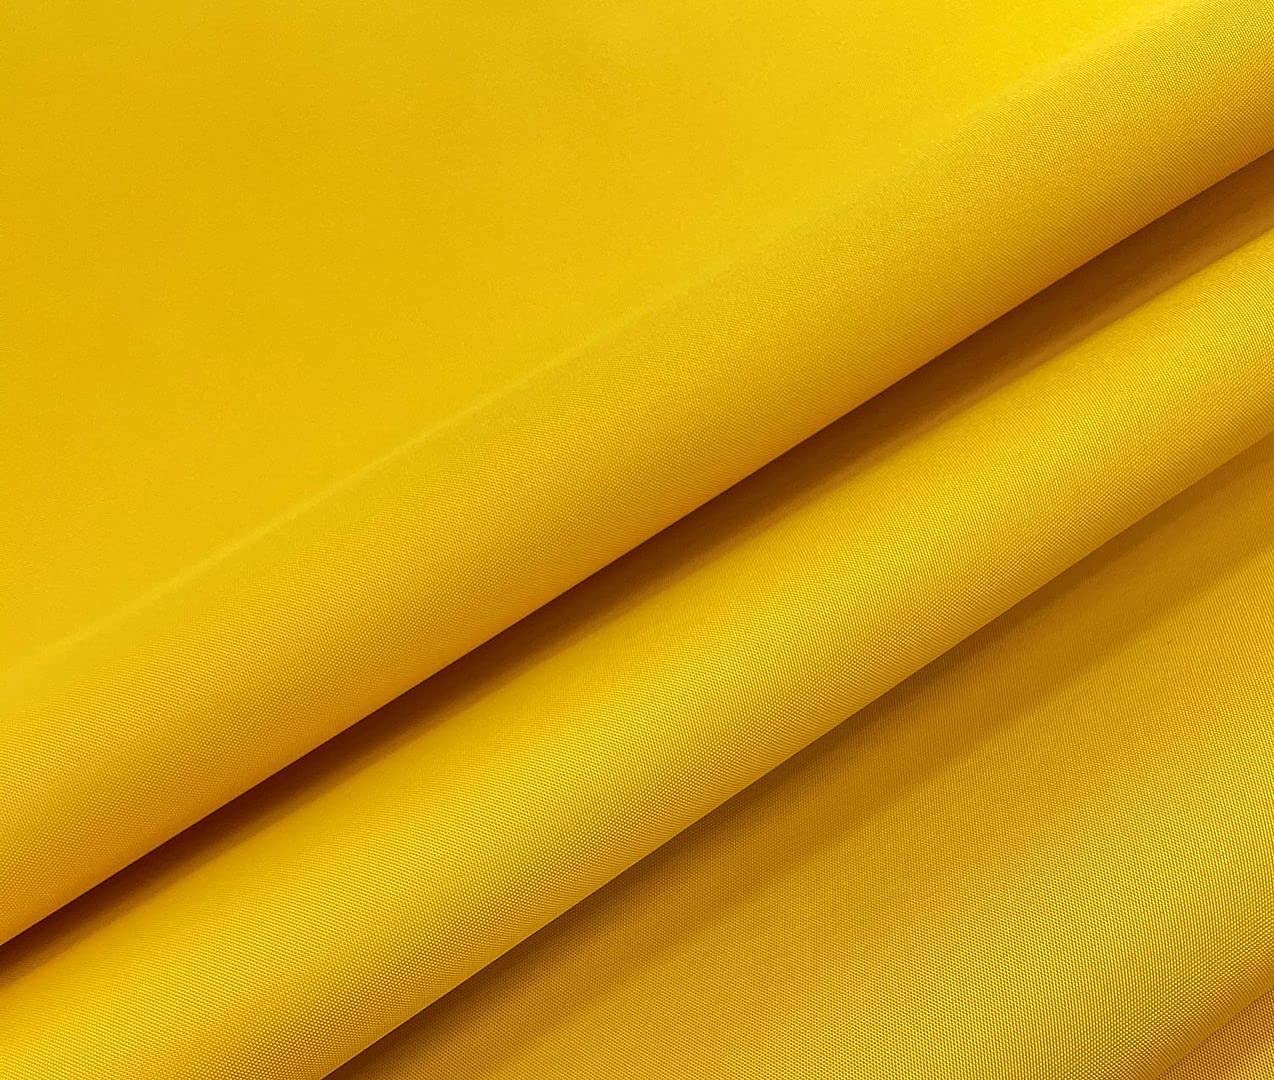 Canvas Awning Fabric MARINE OUTDOOR FABRIC 60" Wide YELLOW Neon (5 yards)